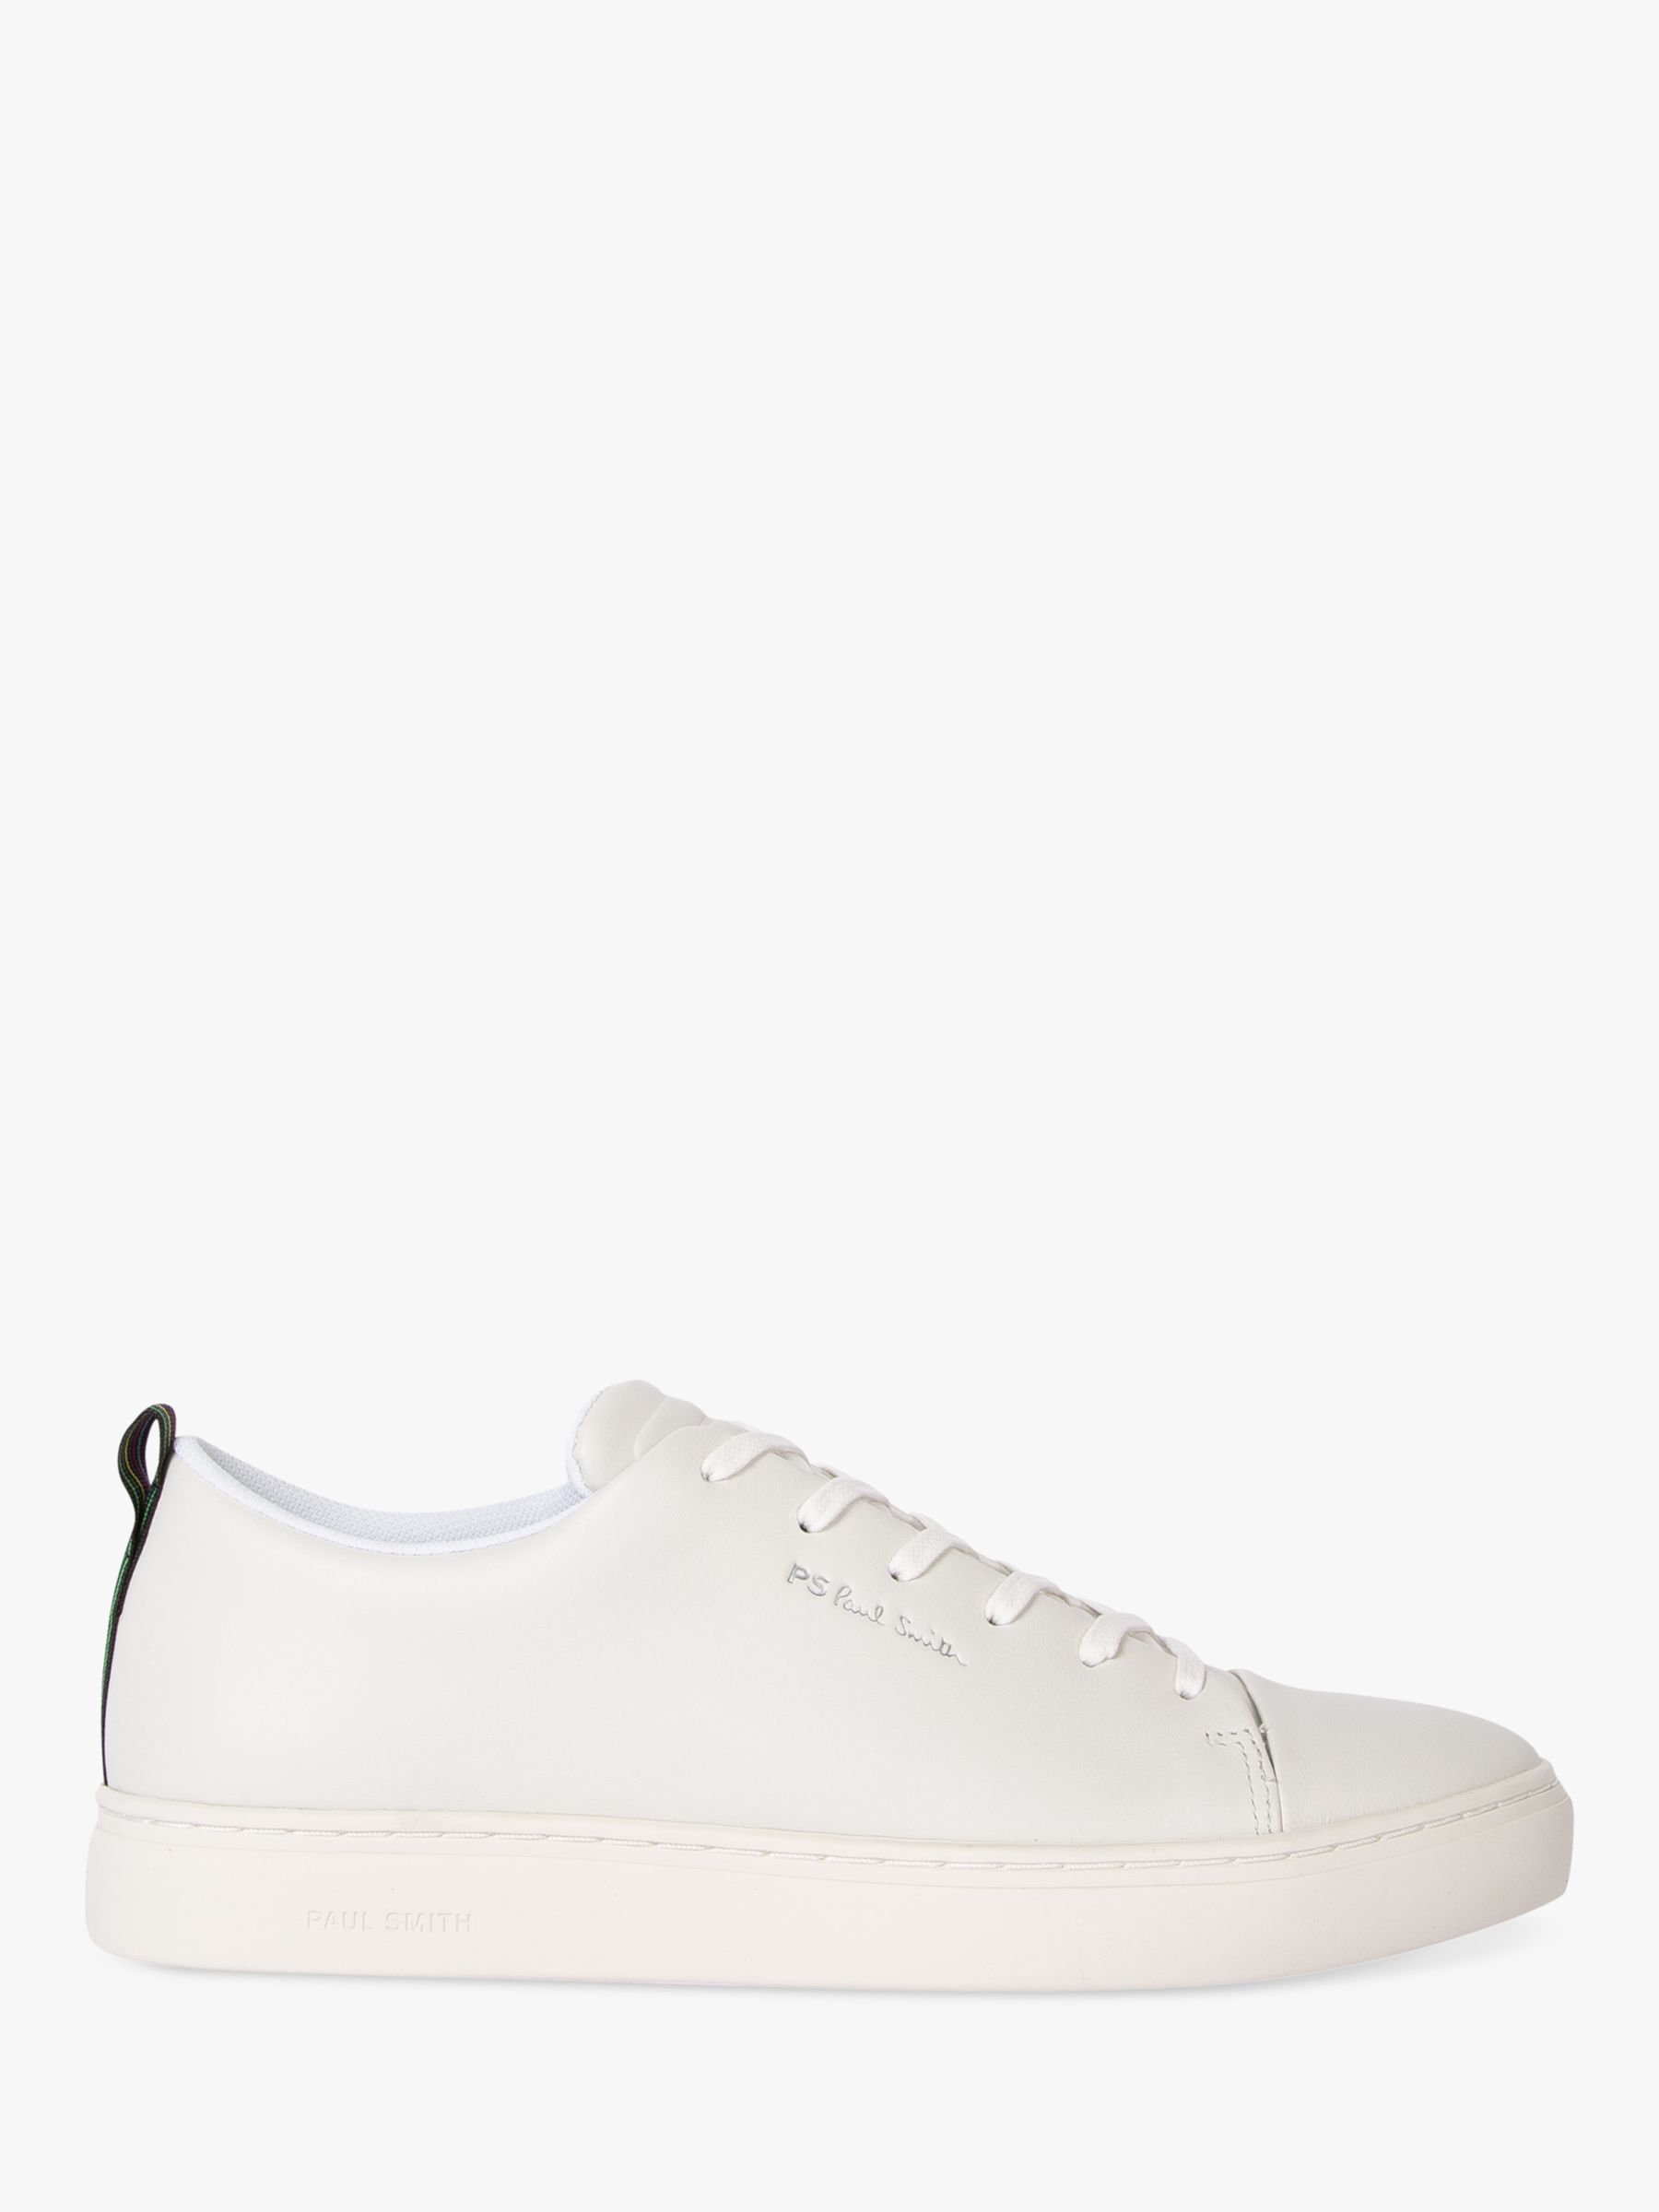 Paul Smith Lee Cupsole Trainers, White, 7